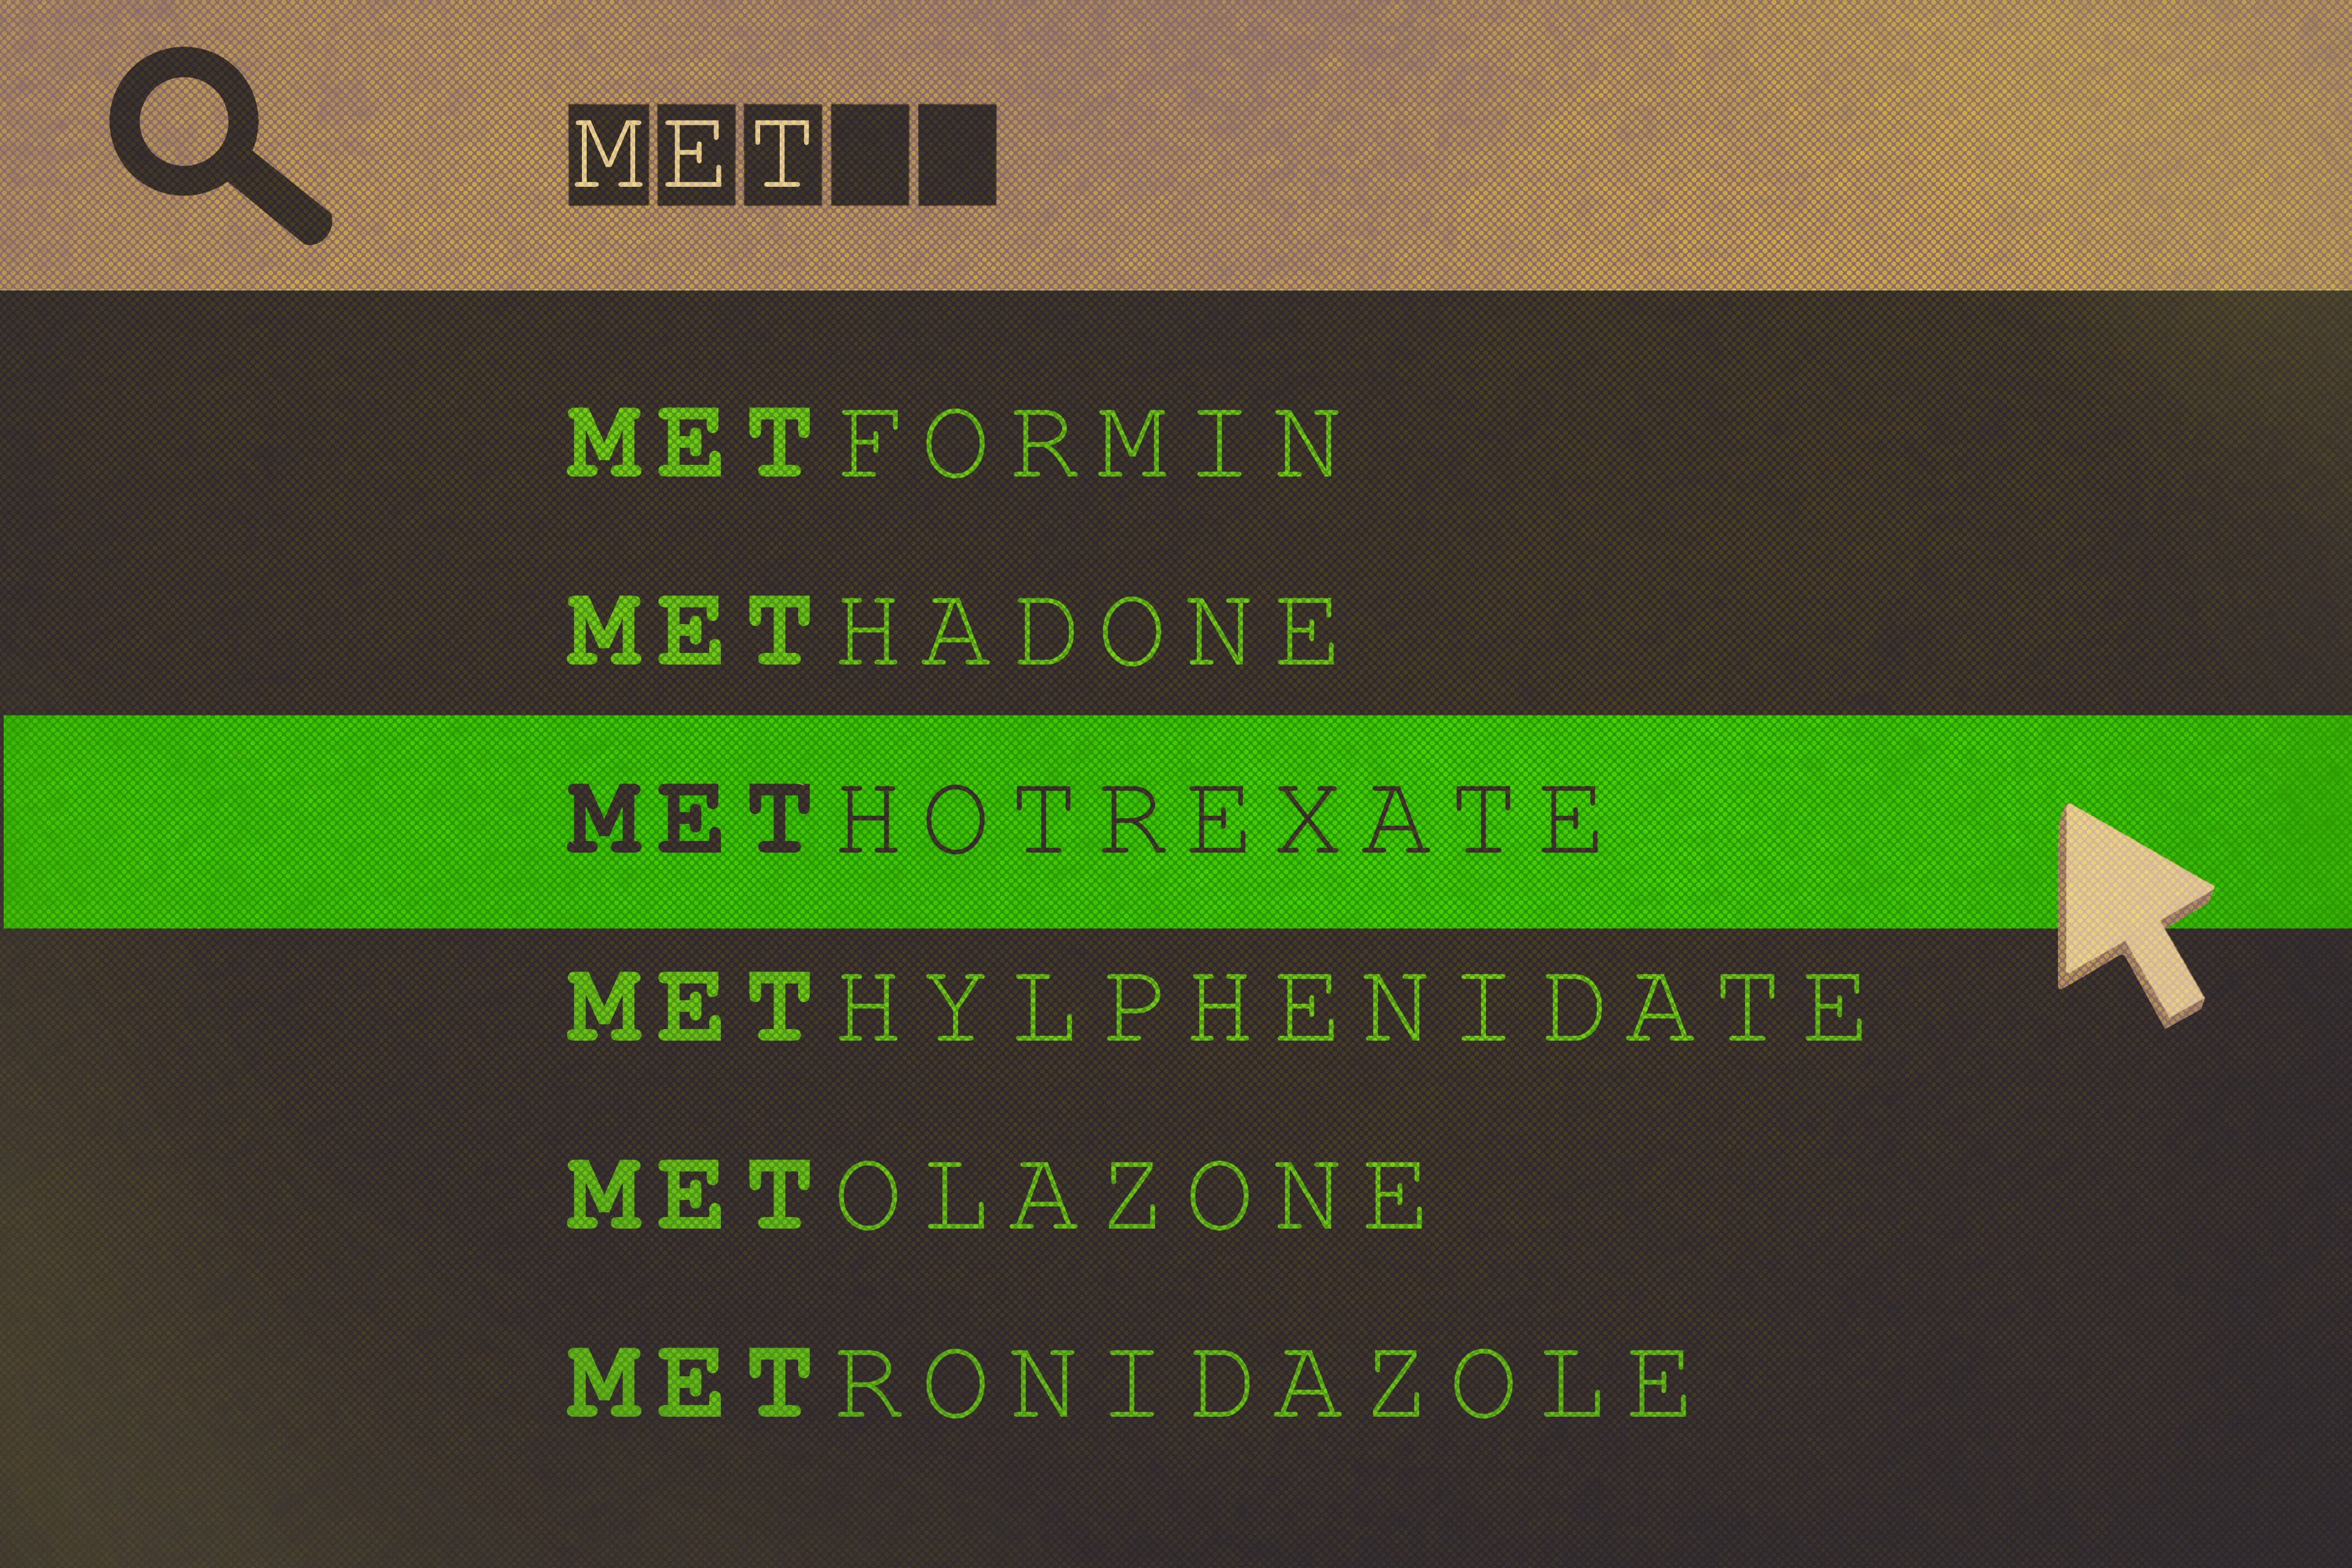 A digital illustration of six drugs that appear when searching M-E-T in a drug cabinet.